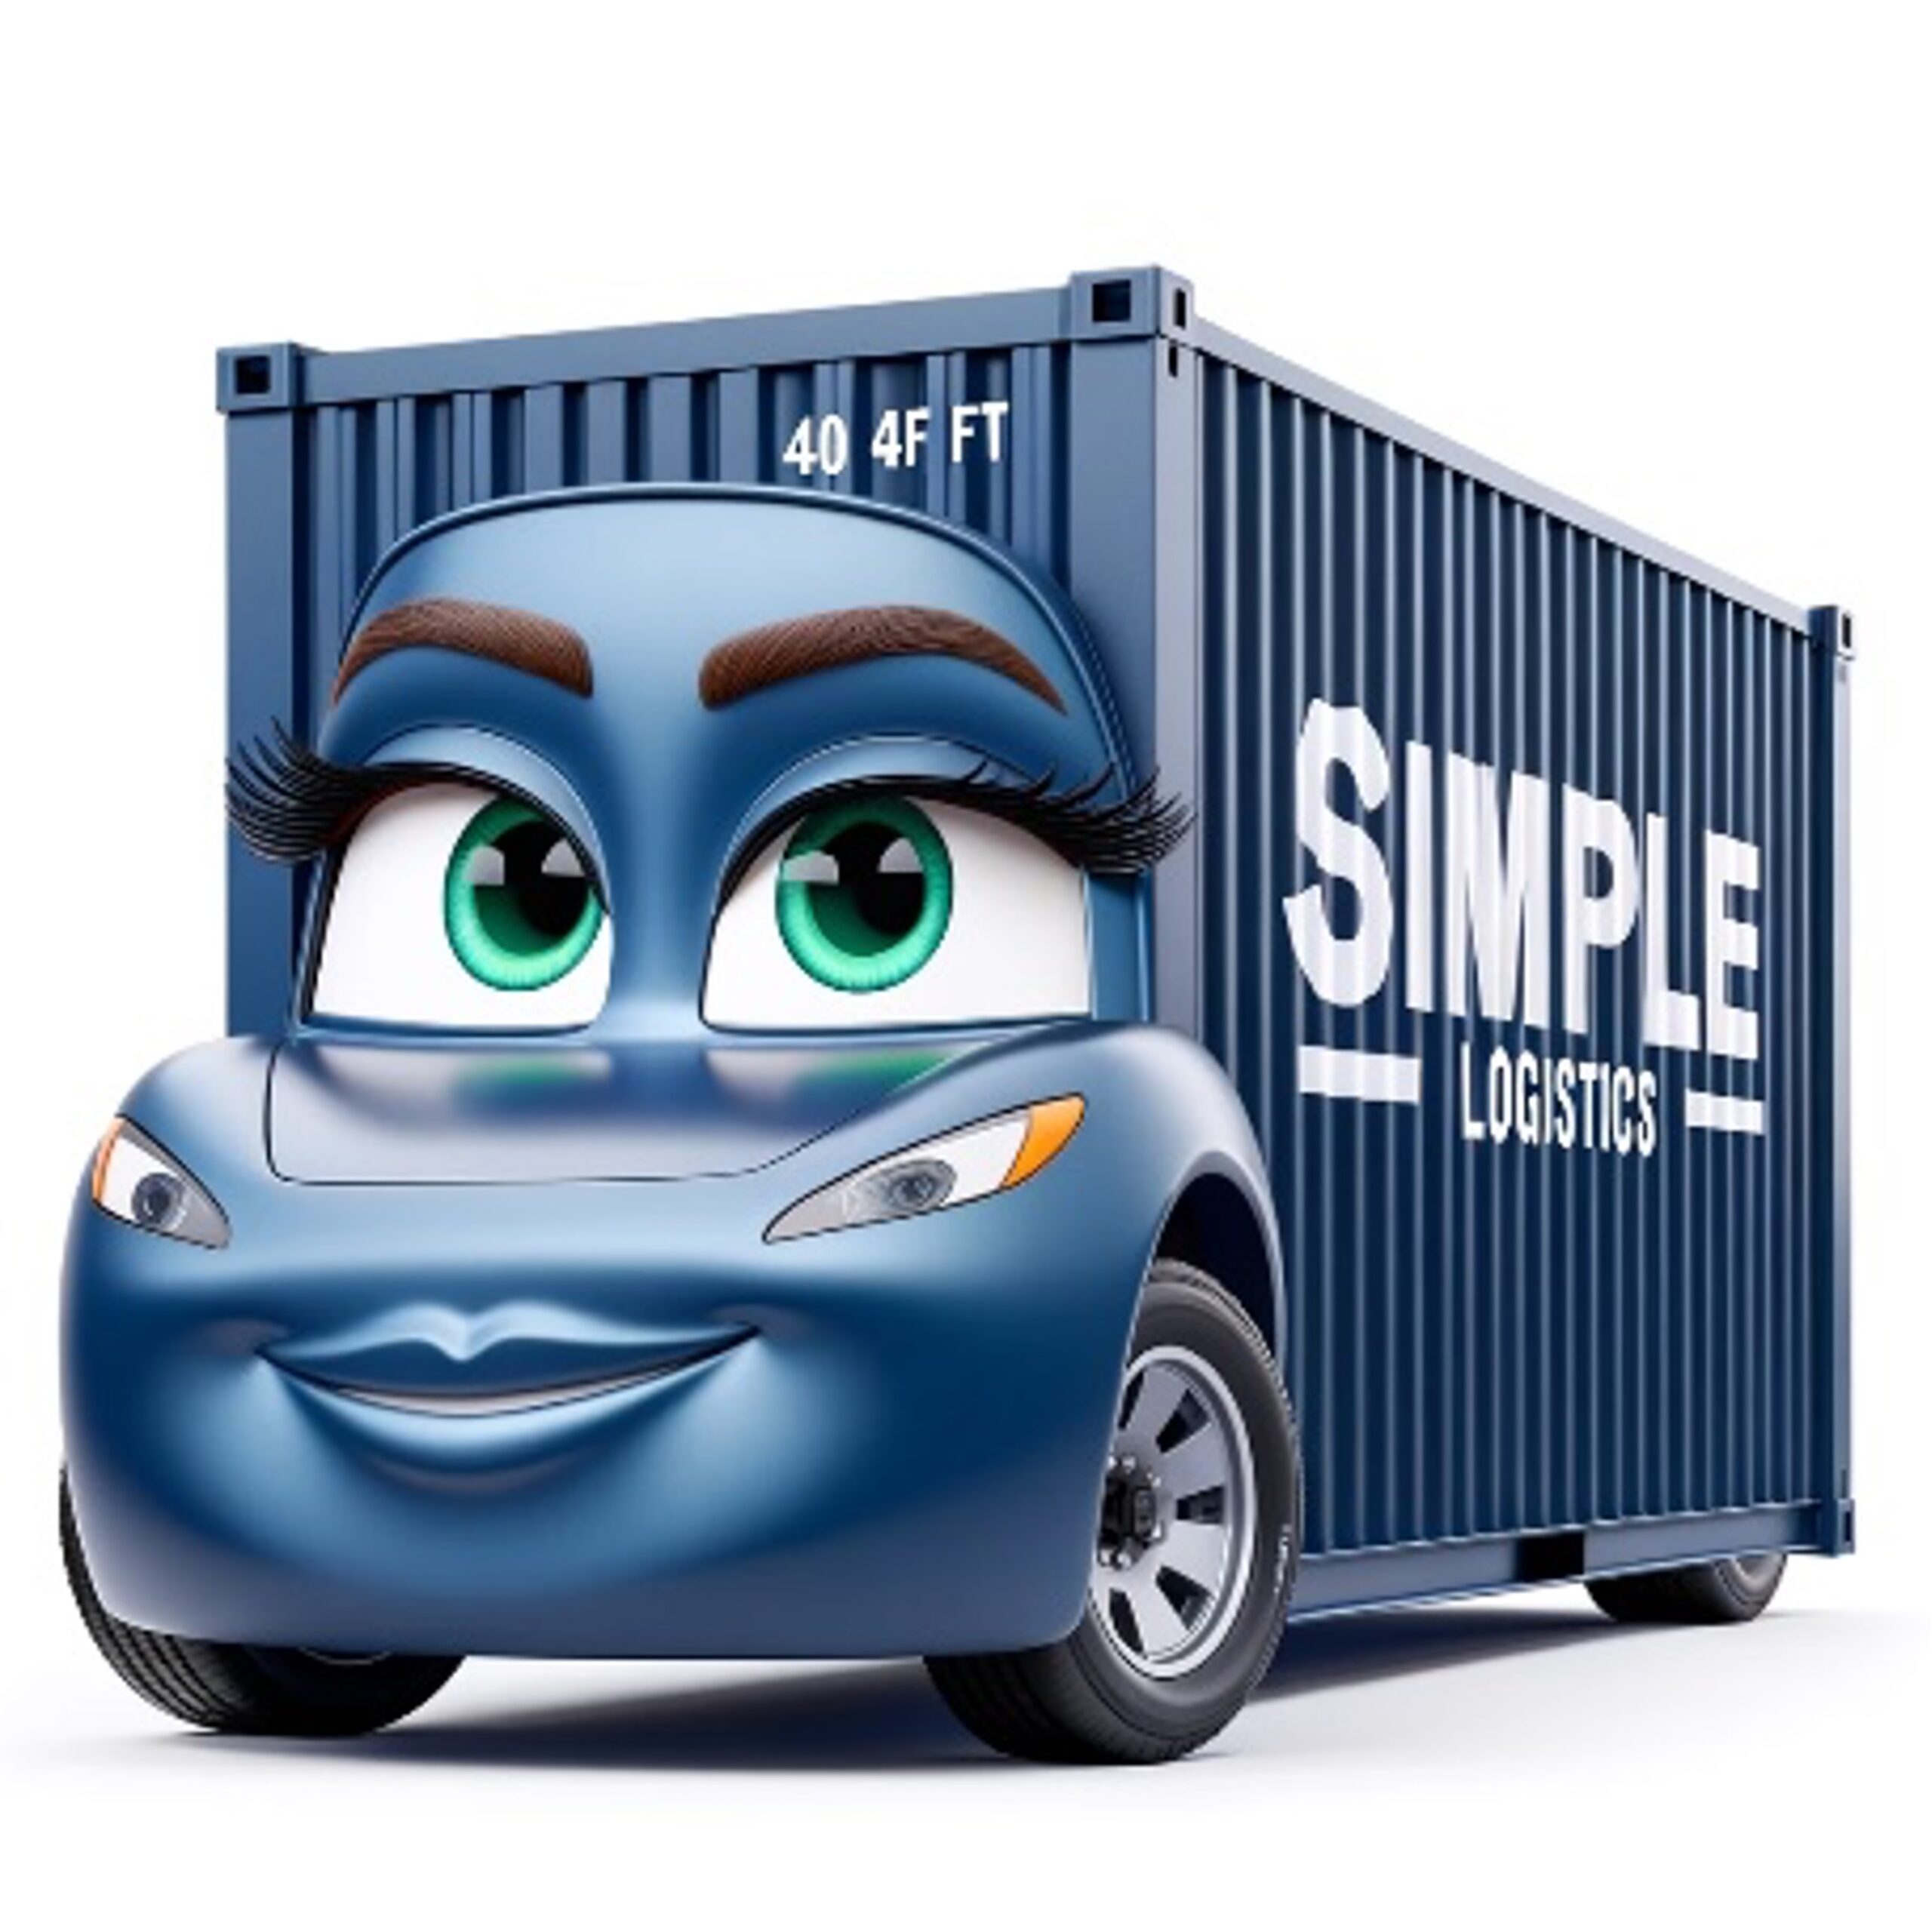 Cartoon graphic of Truck with Simple Logistics on the side